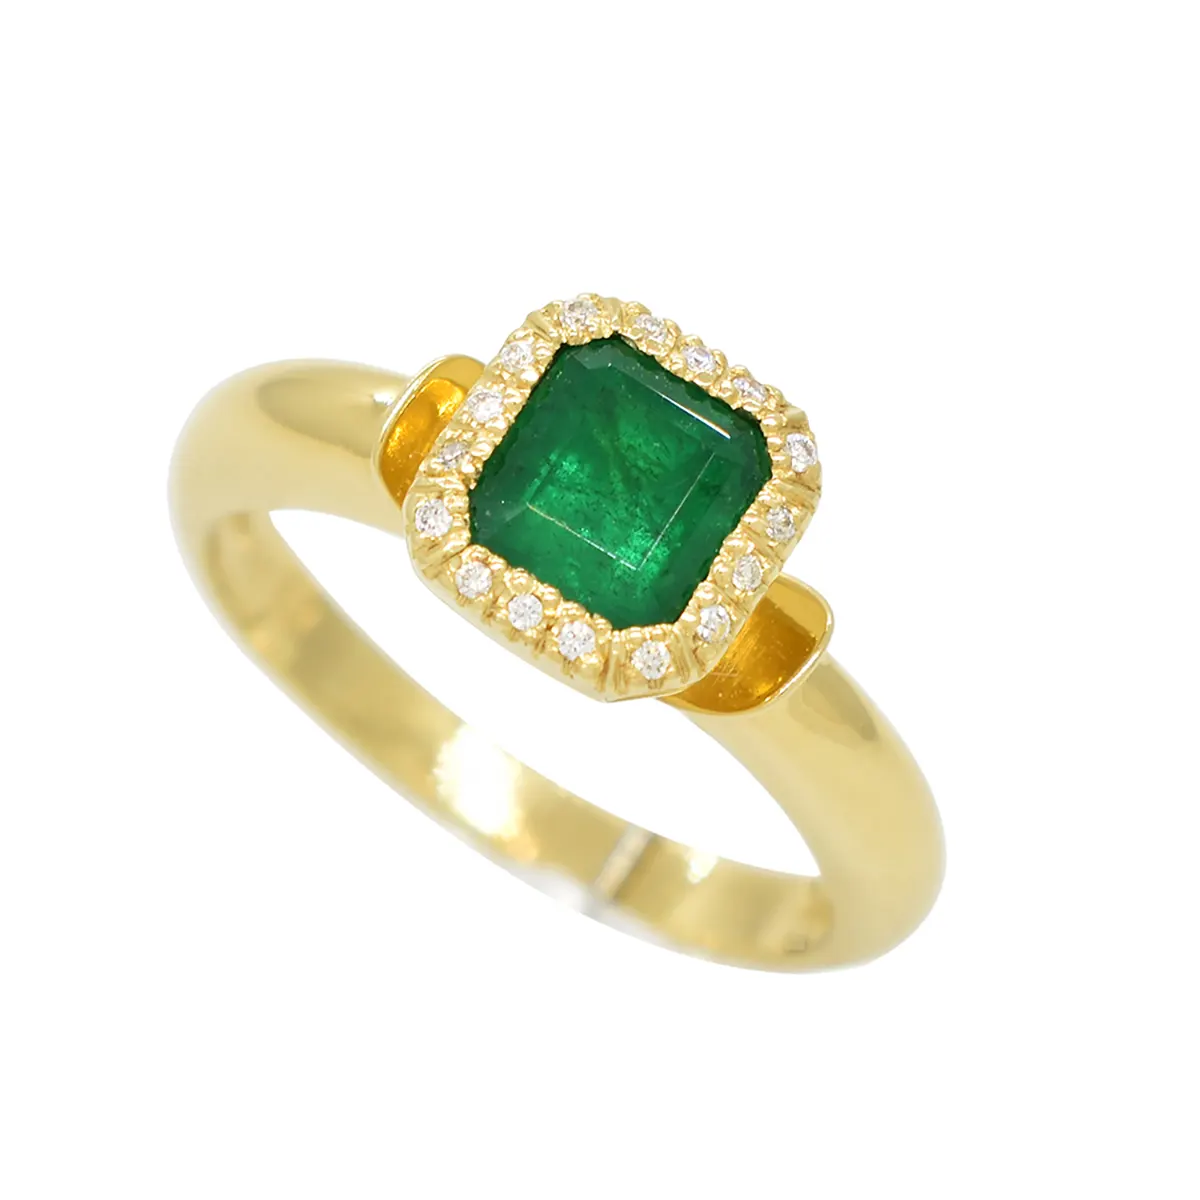 Genuine Natural Diamonds Emeralds Solid 9ct Yellow Gold Engagement Wedding Rings 